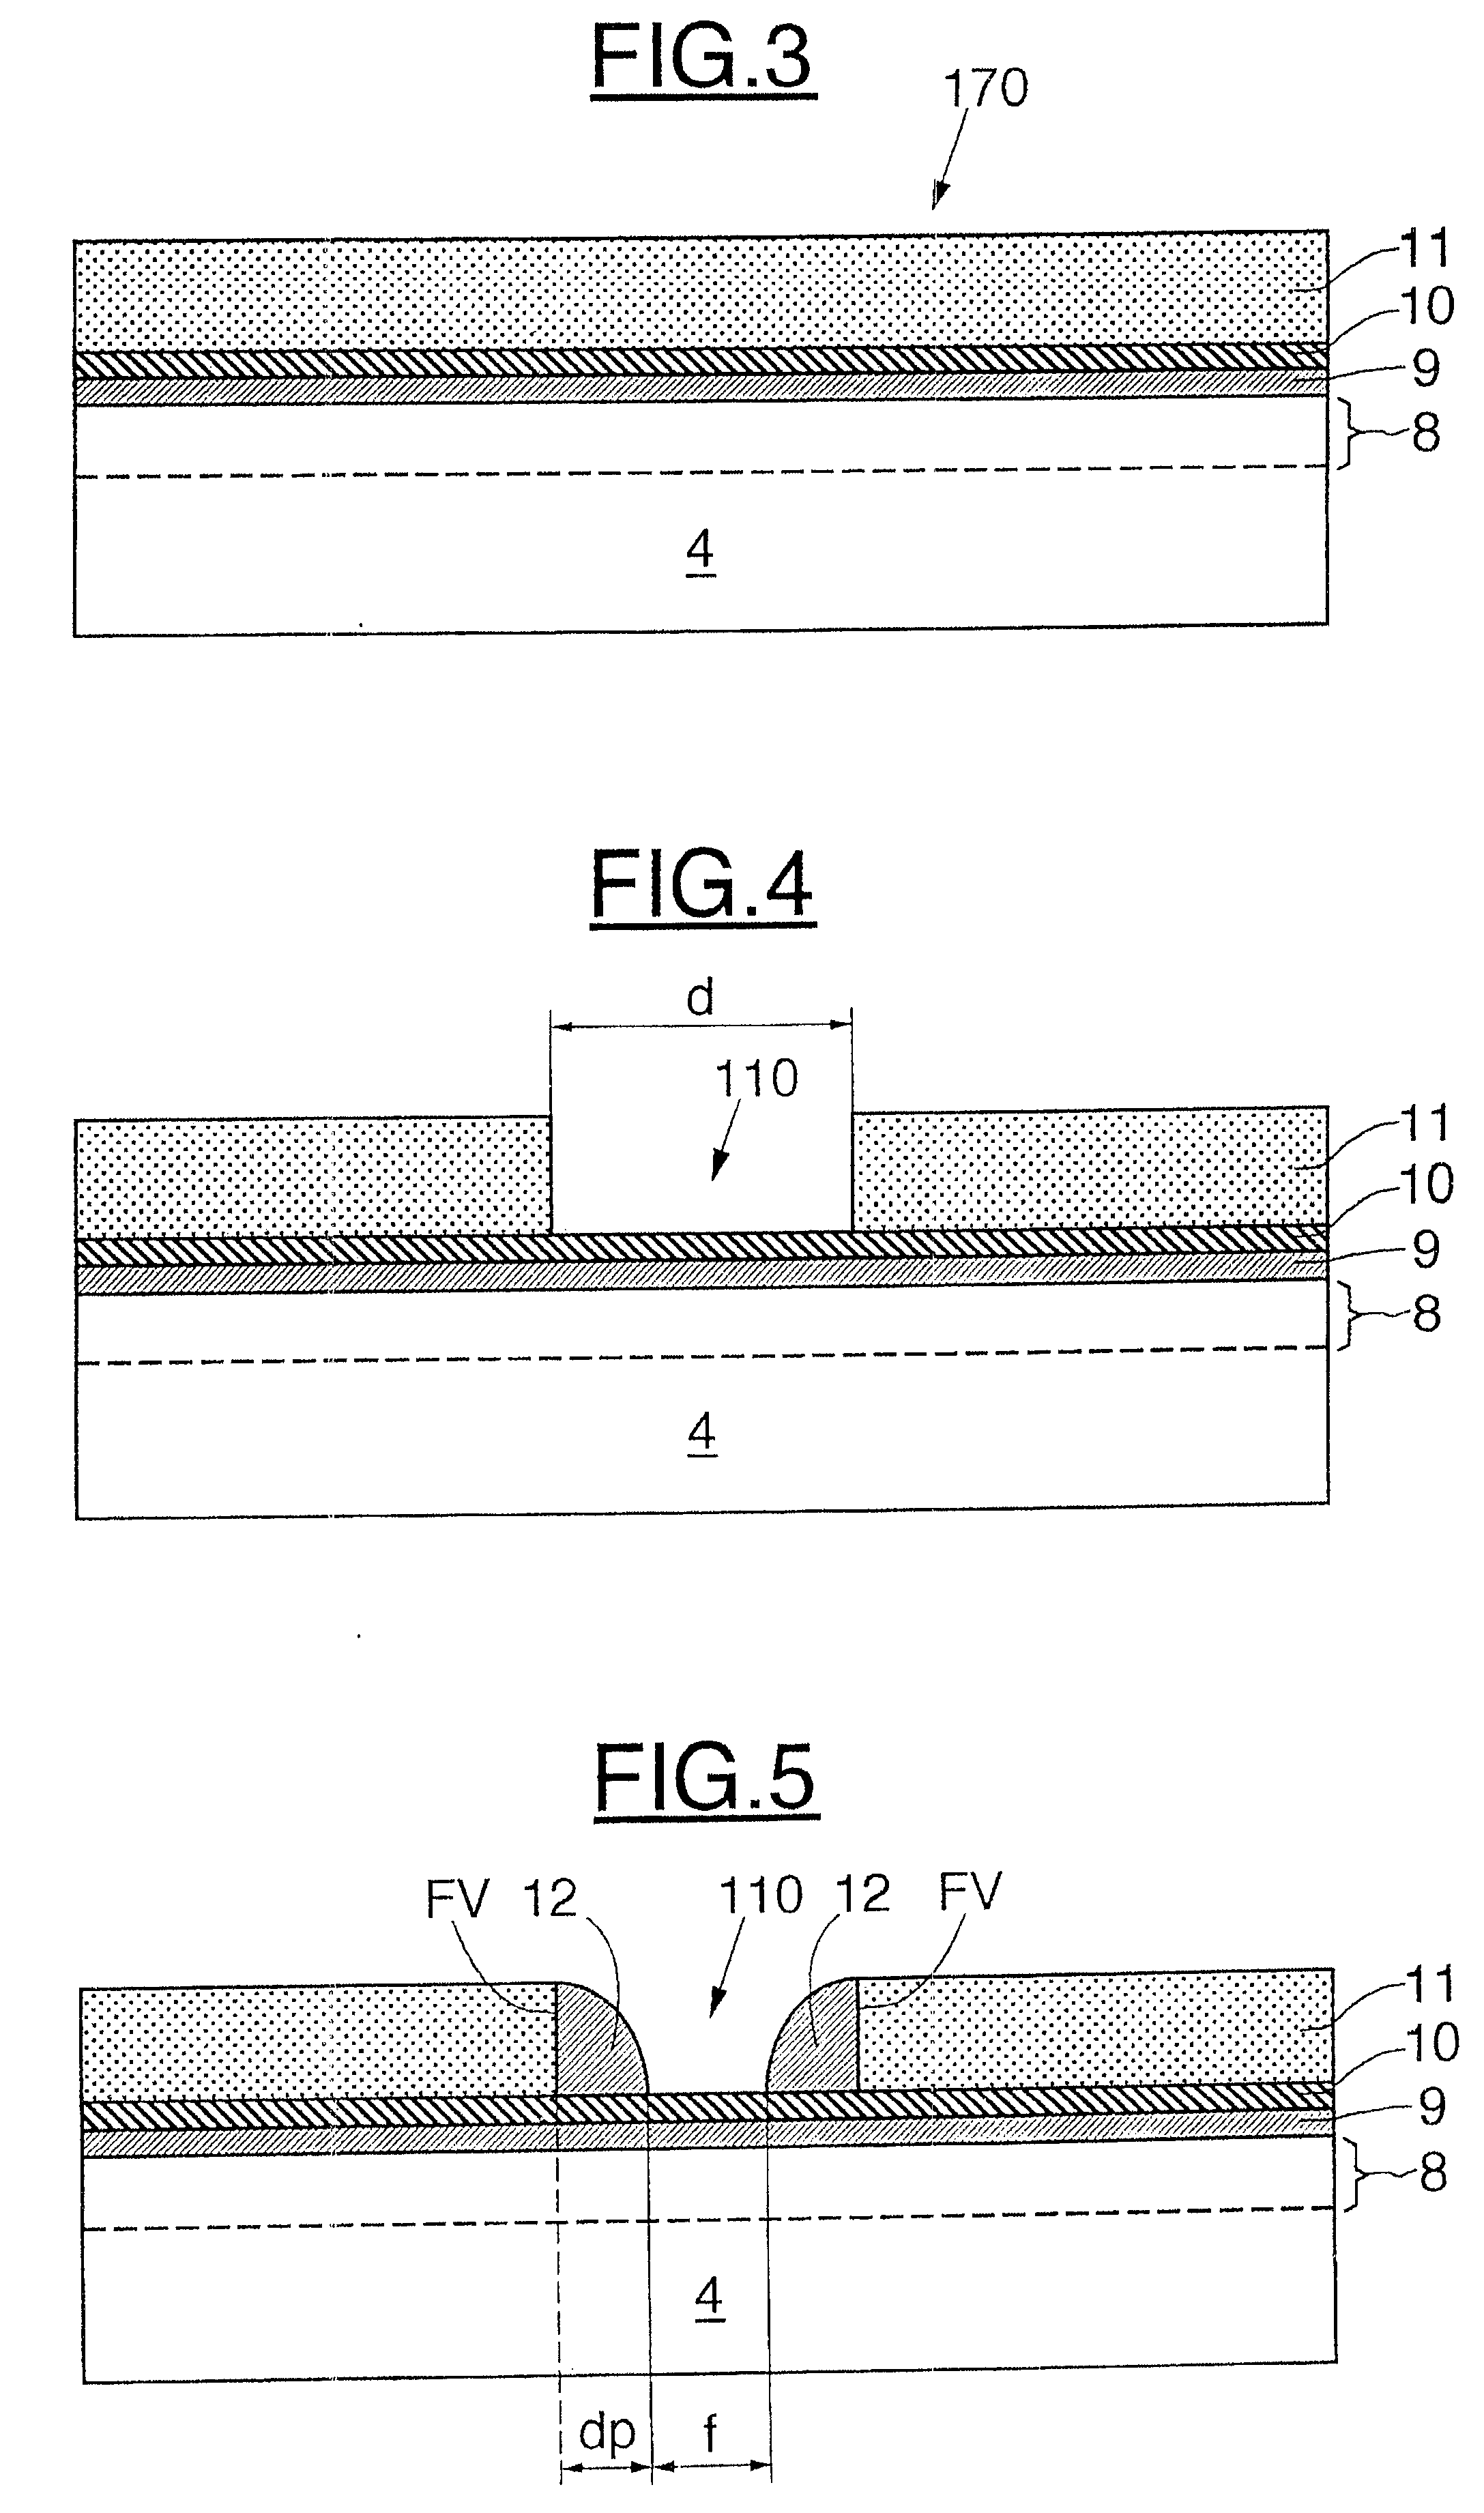 Process for fabricating a self-aligned vertical bipolar transistor